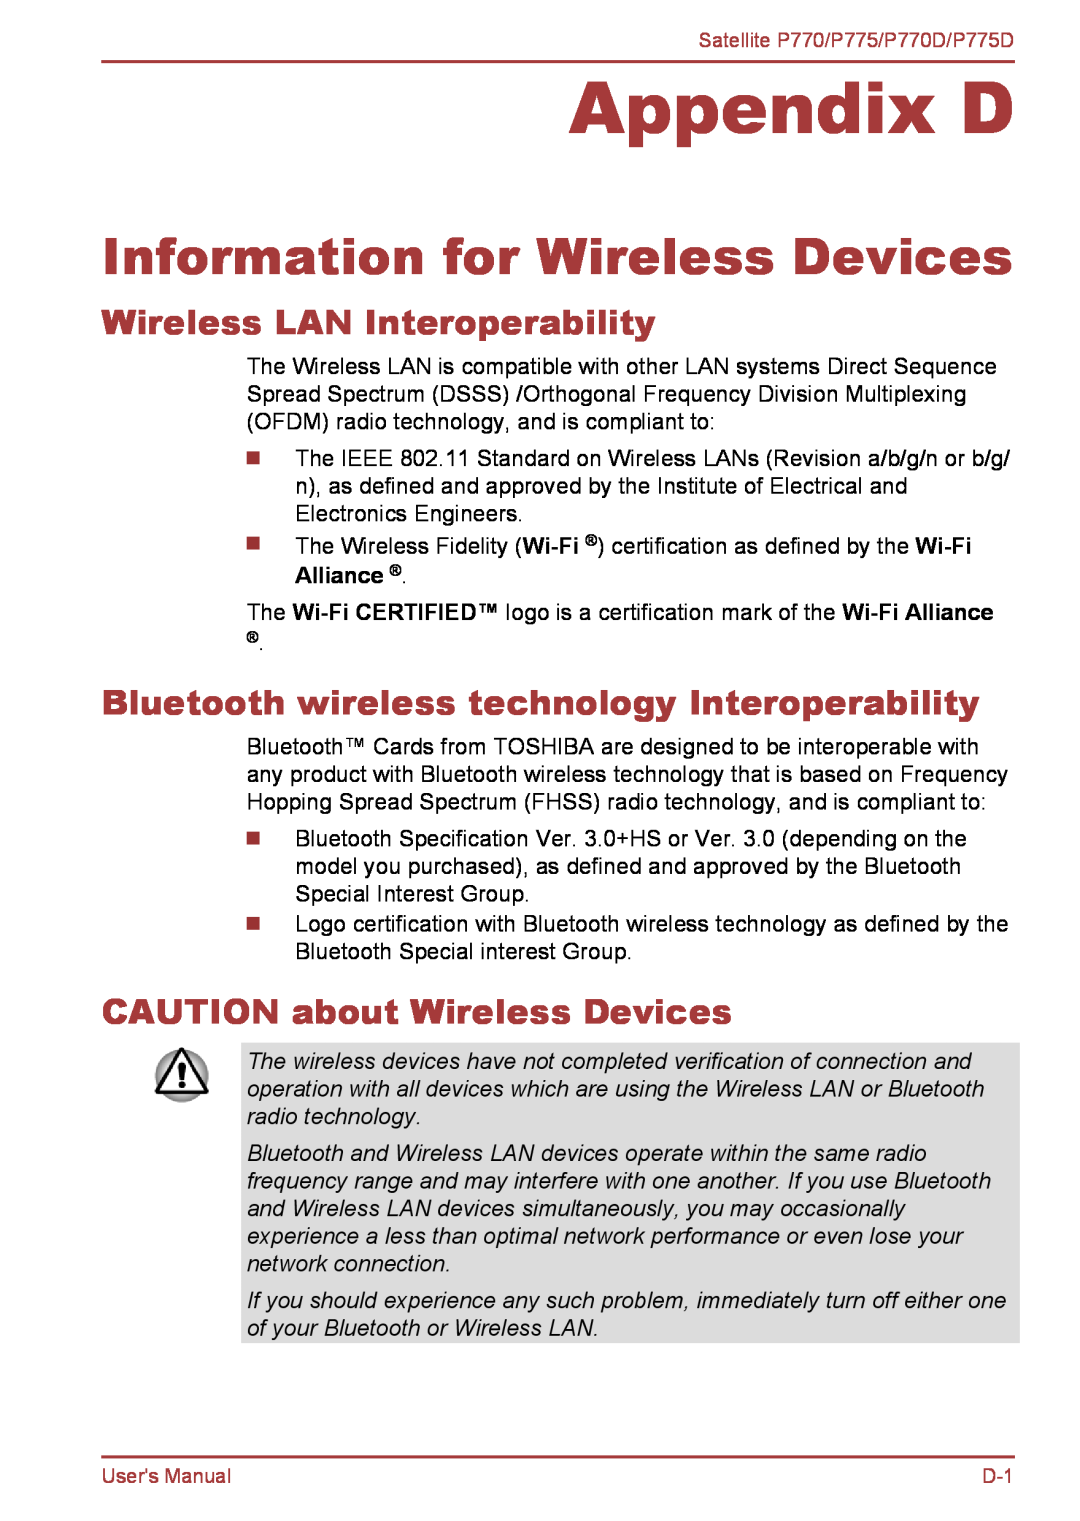 Toshiba P770 Appendix D, Information for Wireless Devices, Wireless LAN Interoperability, CAUTION about Wireless Devices 